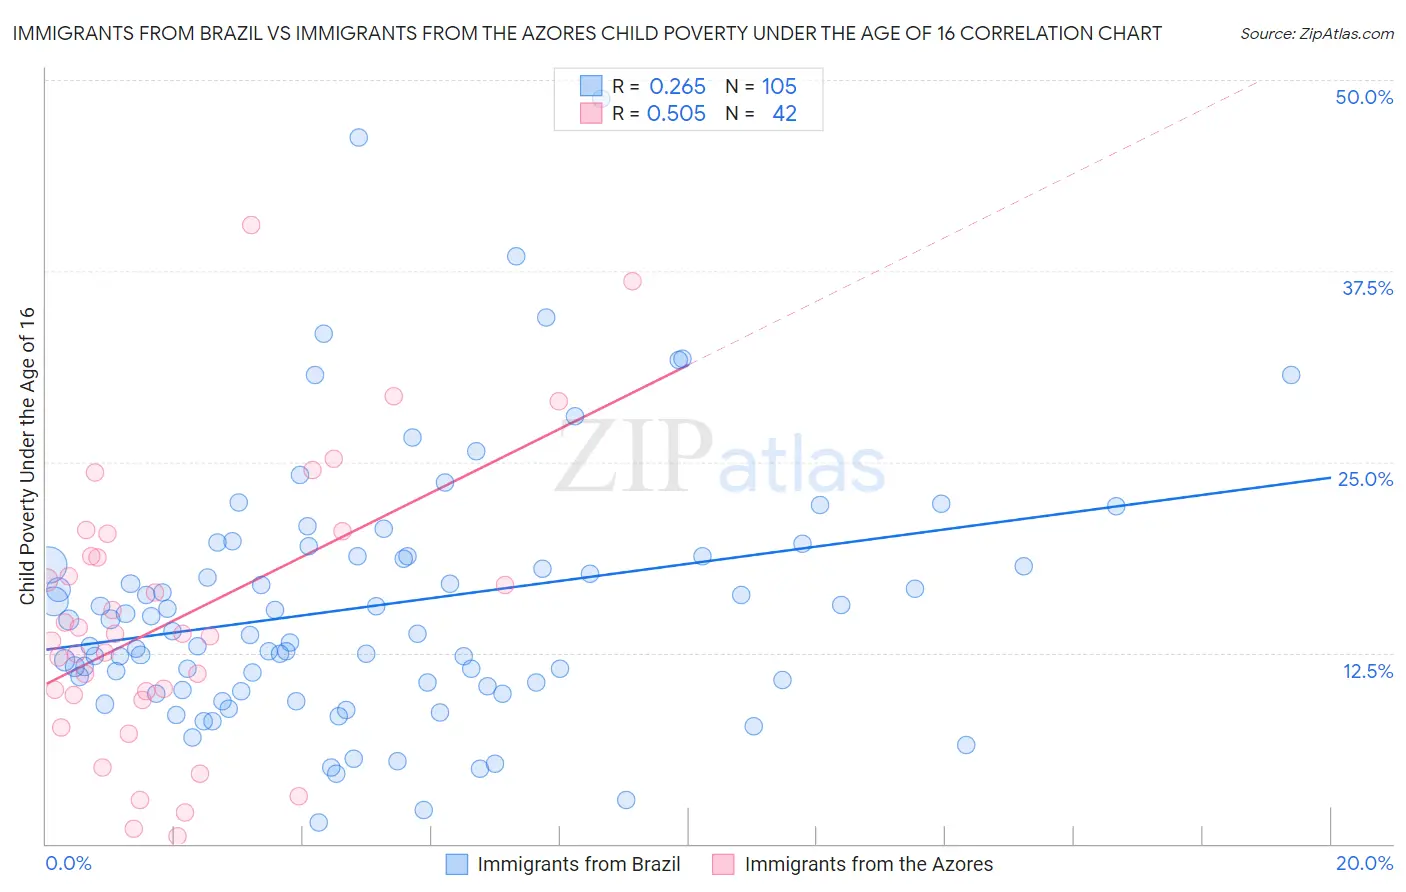 Immigrants from Brazil vs Immigrants from the Azores Child Poverty Under the Age of 16